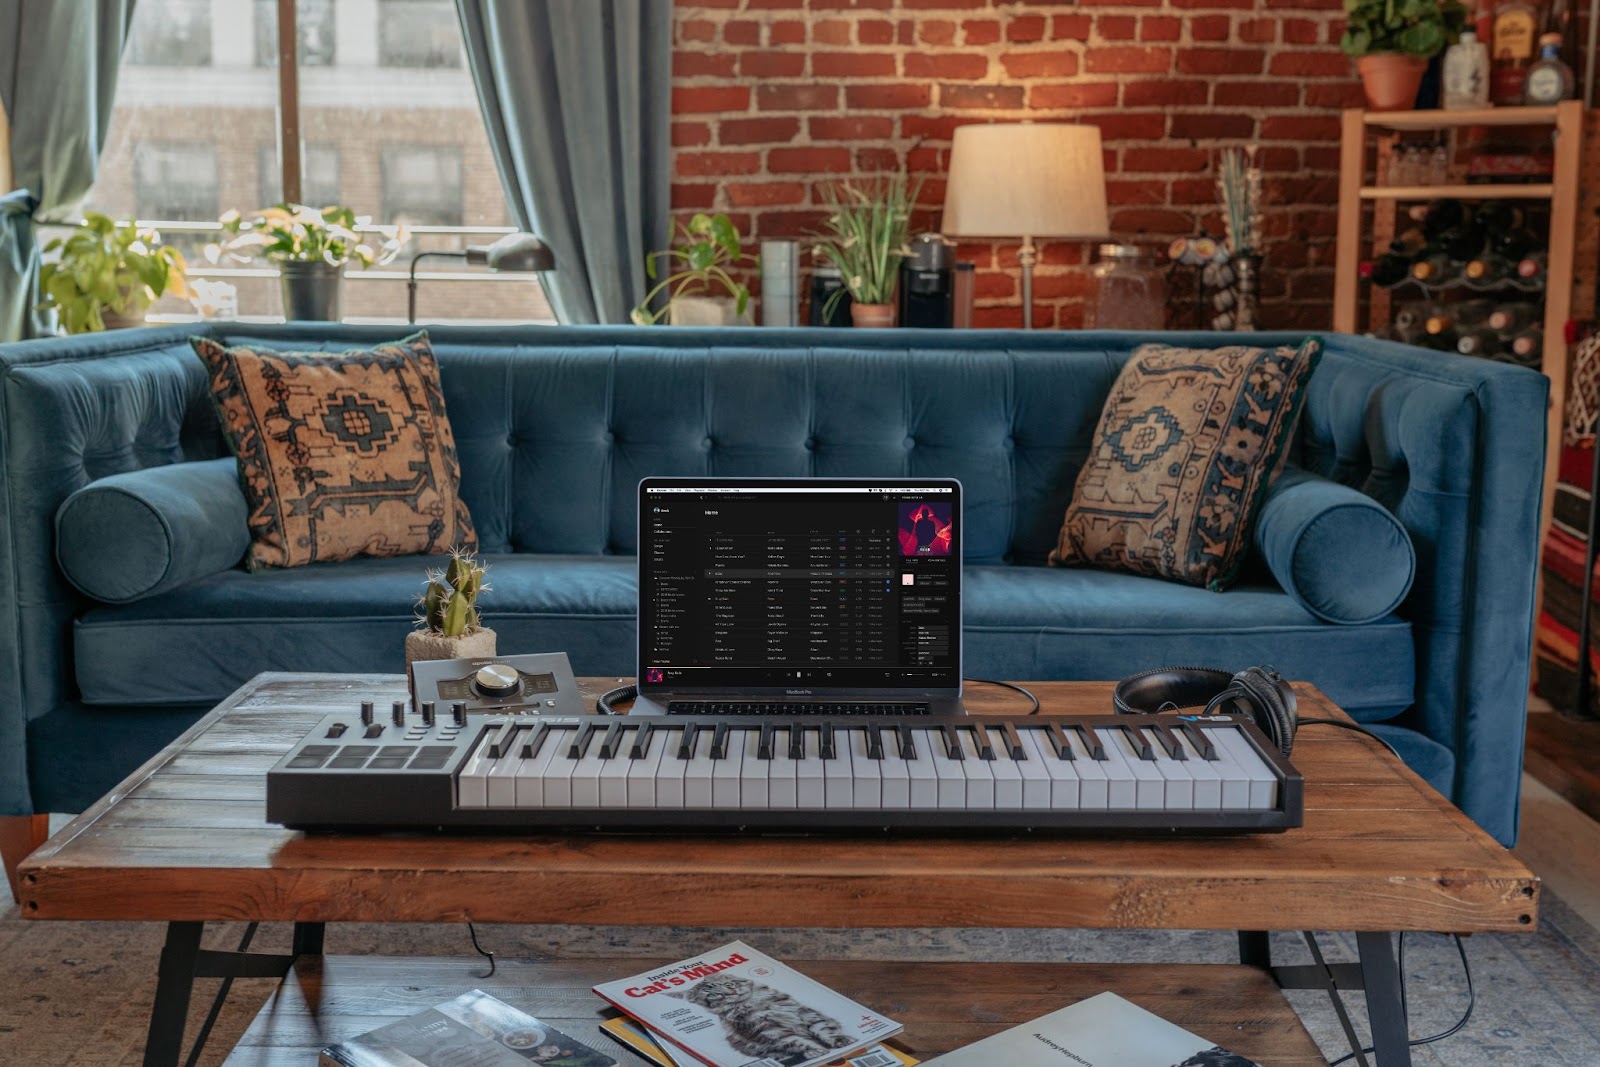  A laptop, keyboard, sound mixer and headphones placed on a brown table - How To Start Making Music at Home